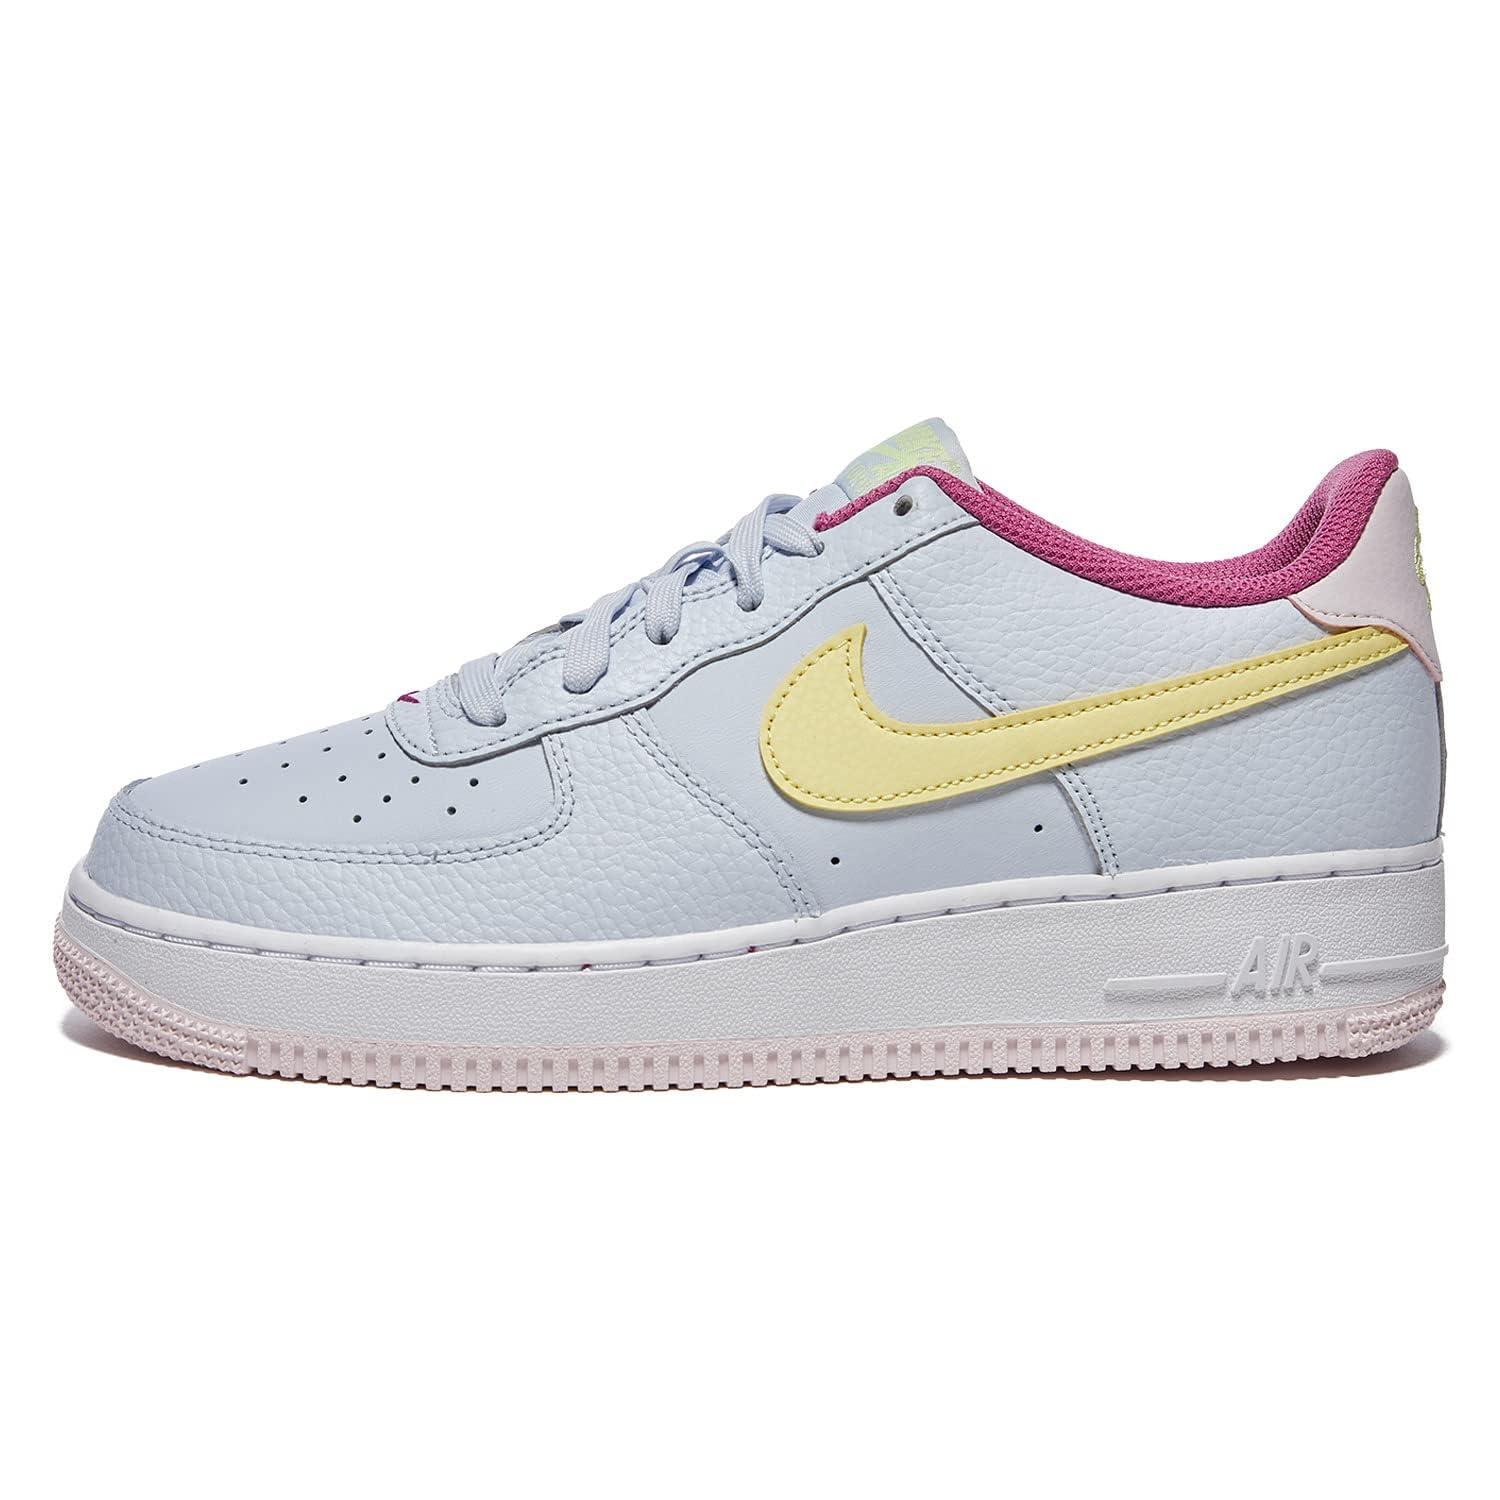 Nike Air Force 1 Low Utility Mens Trainers FJ1533